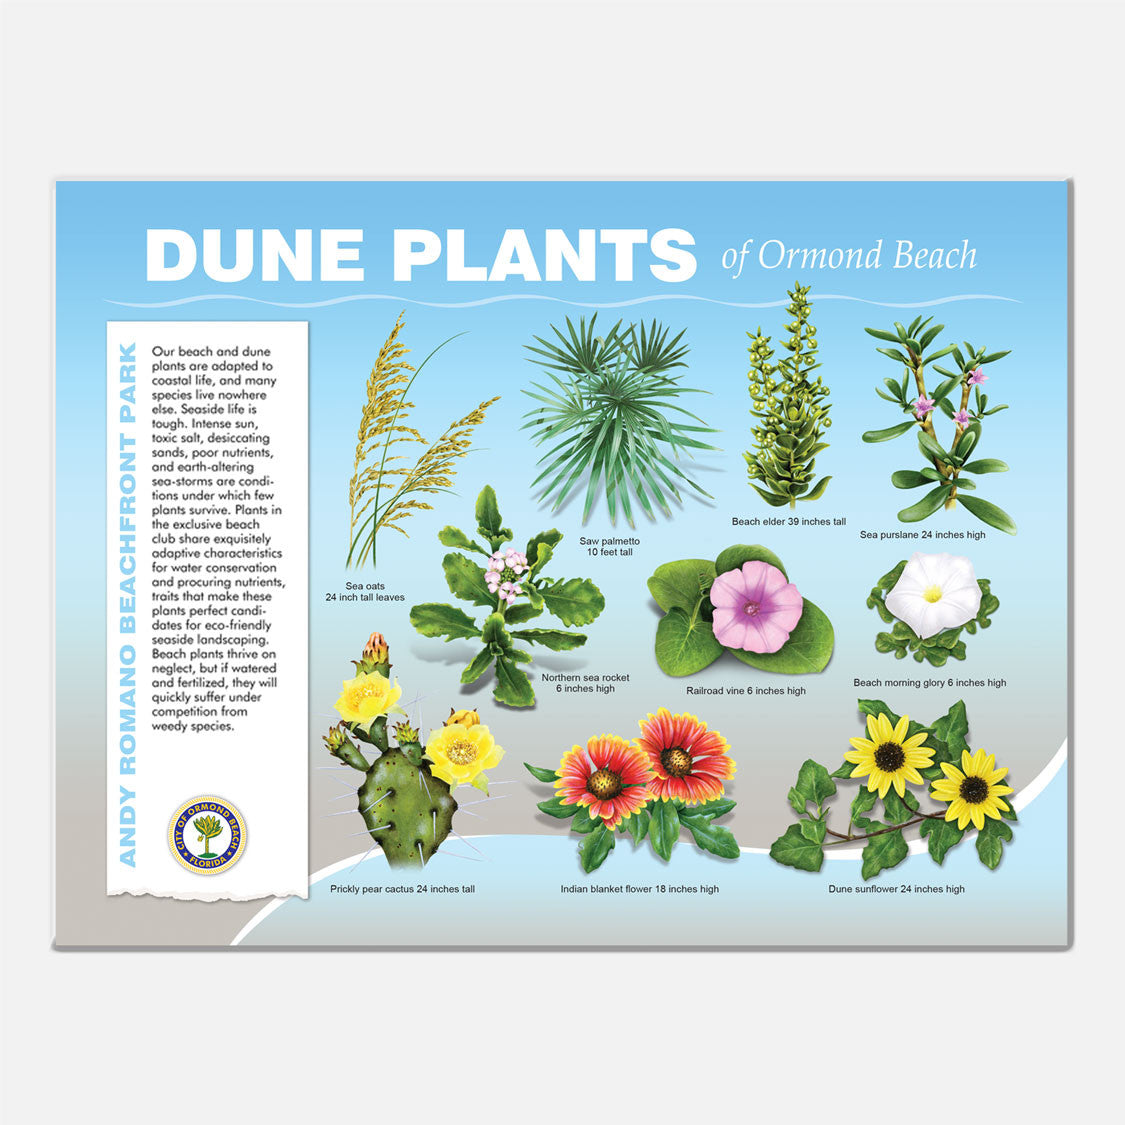 This beautifully illustrated educational display describes and identifies dune plants of Andy Romano Beachfront Park, Ormond Beach, Florida.